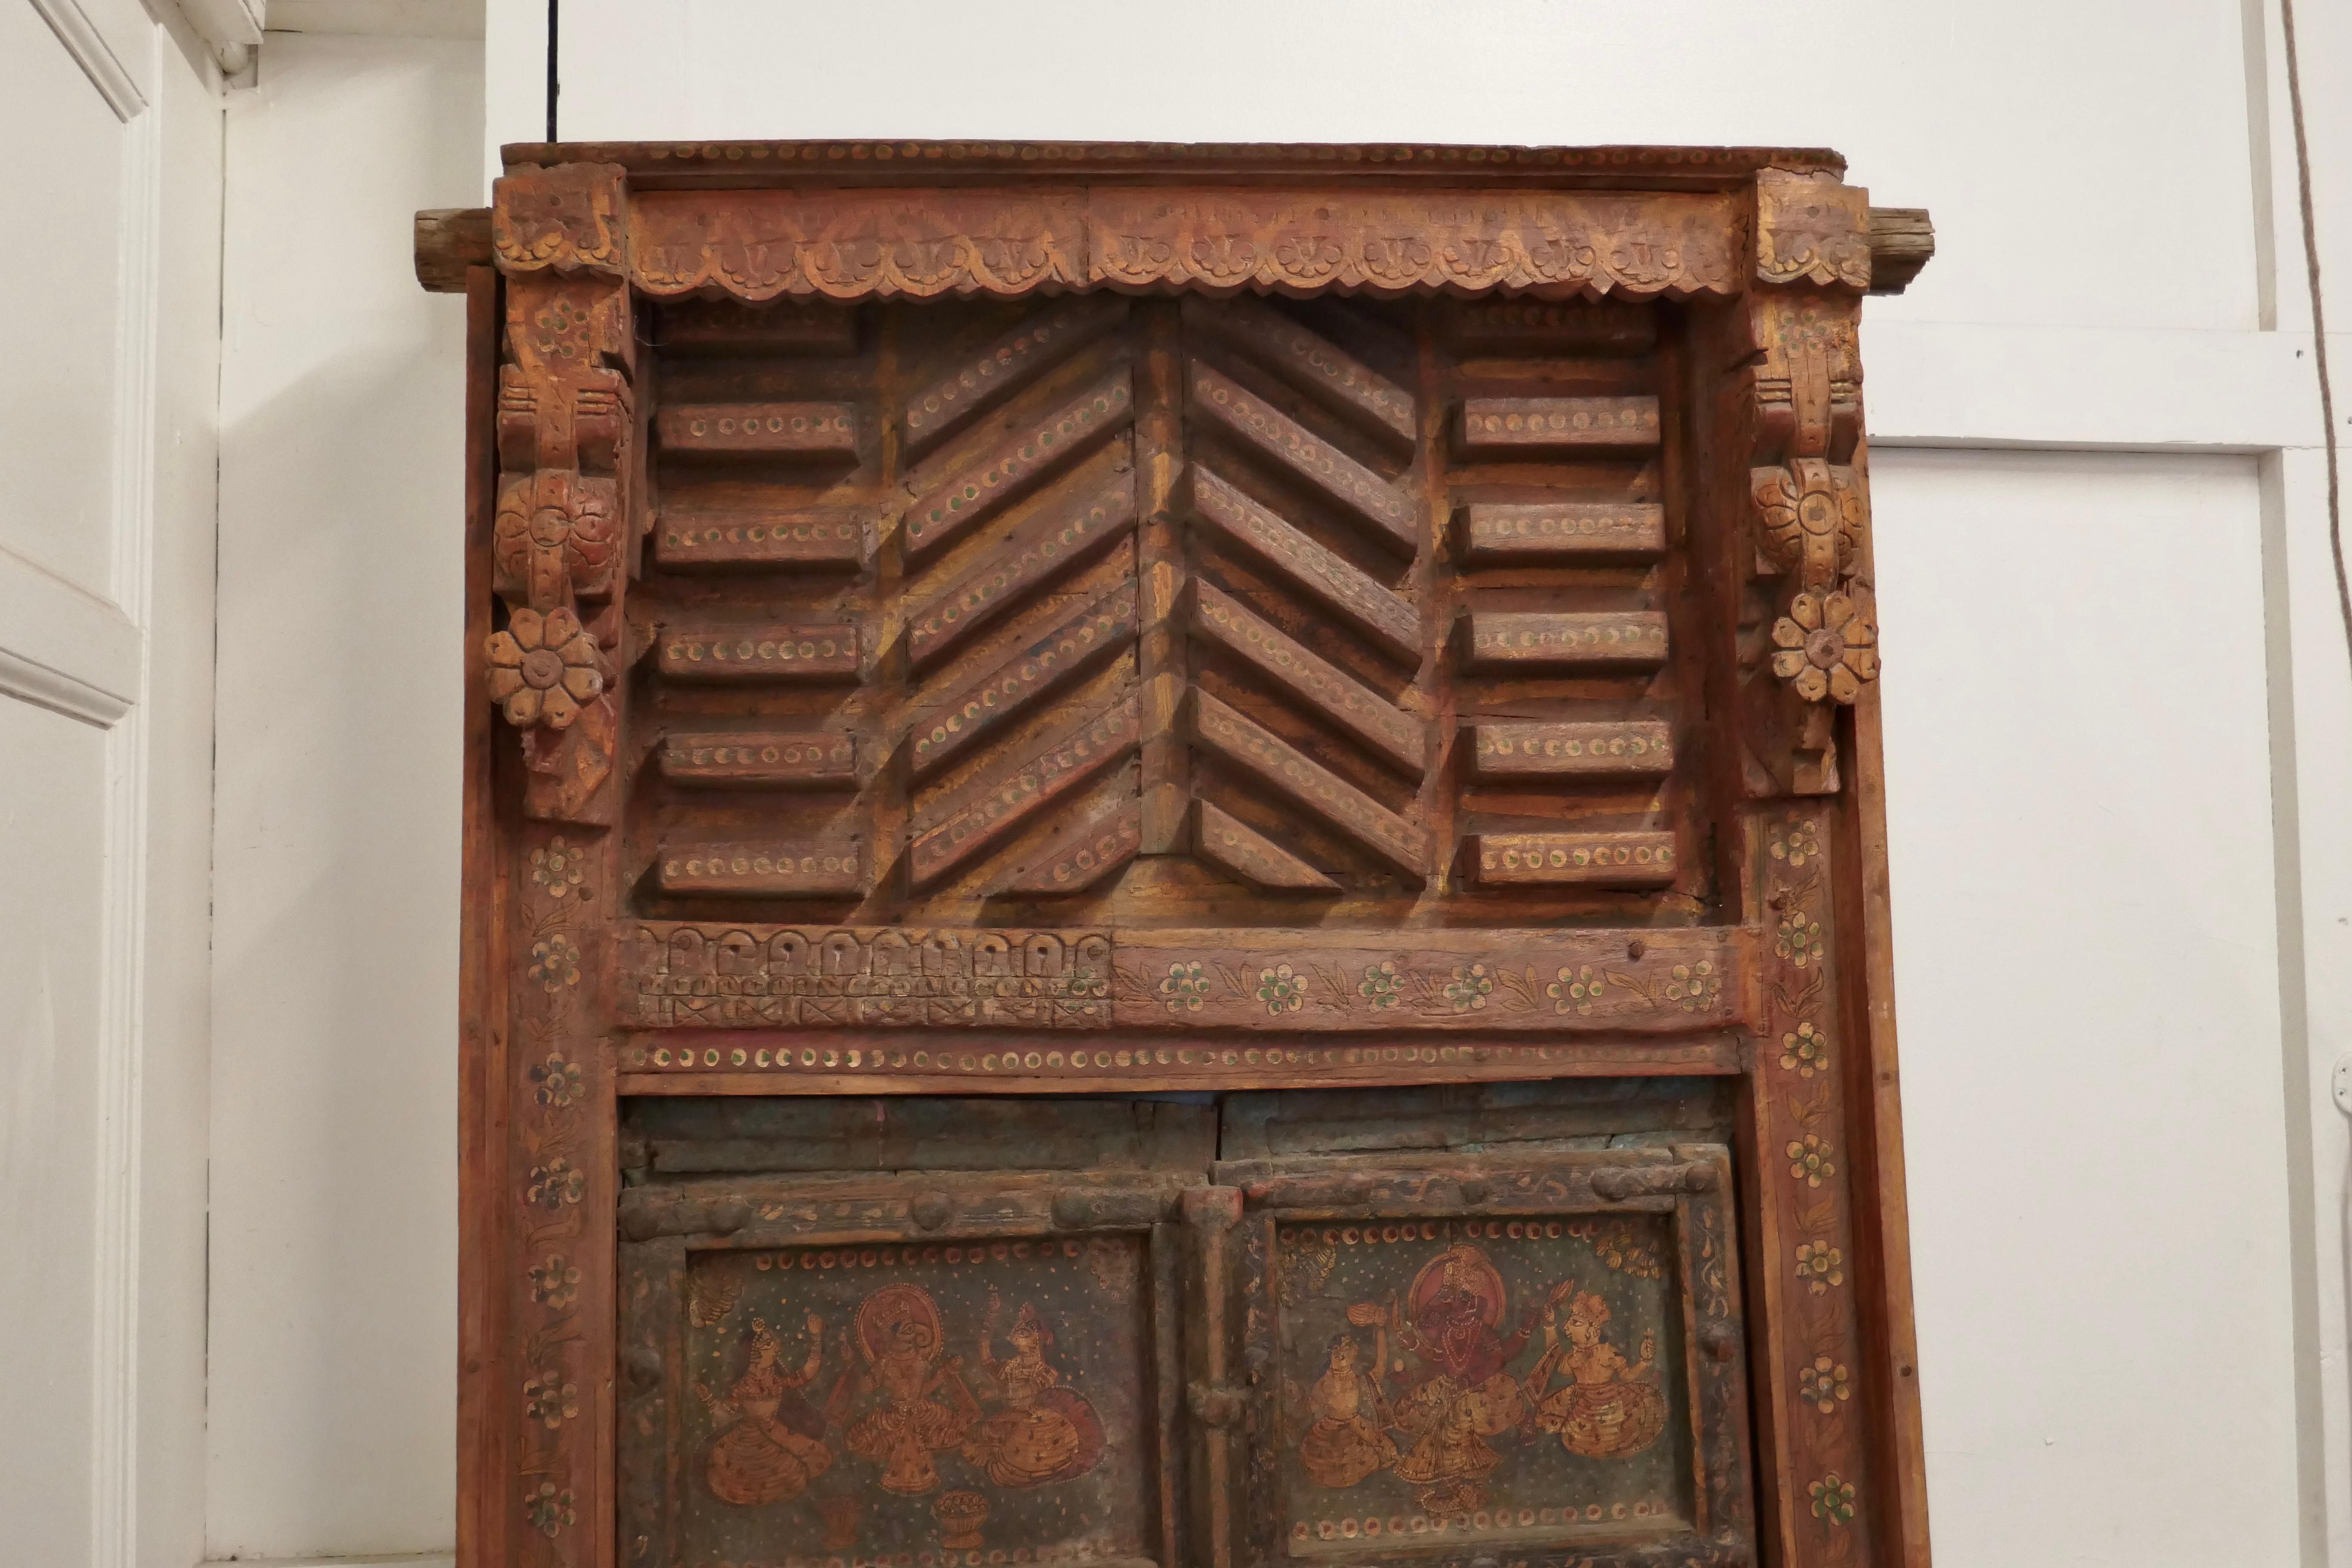 Anglo Indian painted doors in original frame, Wall Art

These beautiful wooden doors would look fabulous on a wall as decoration or relocated in a doorway
The panelled doors come in their original Carved Frame they have been fixed in the closed